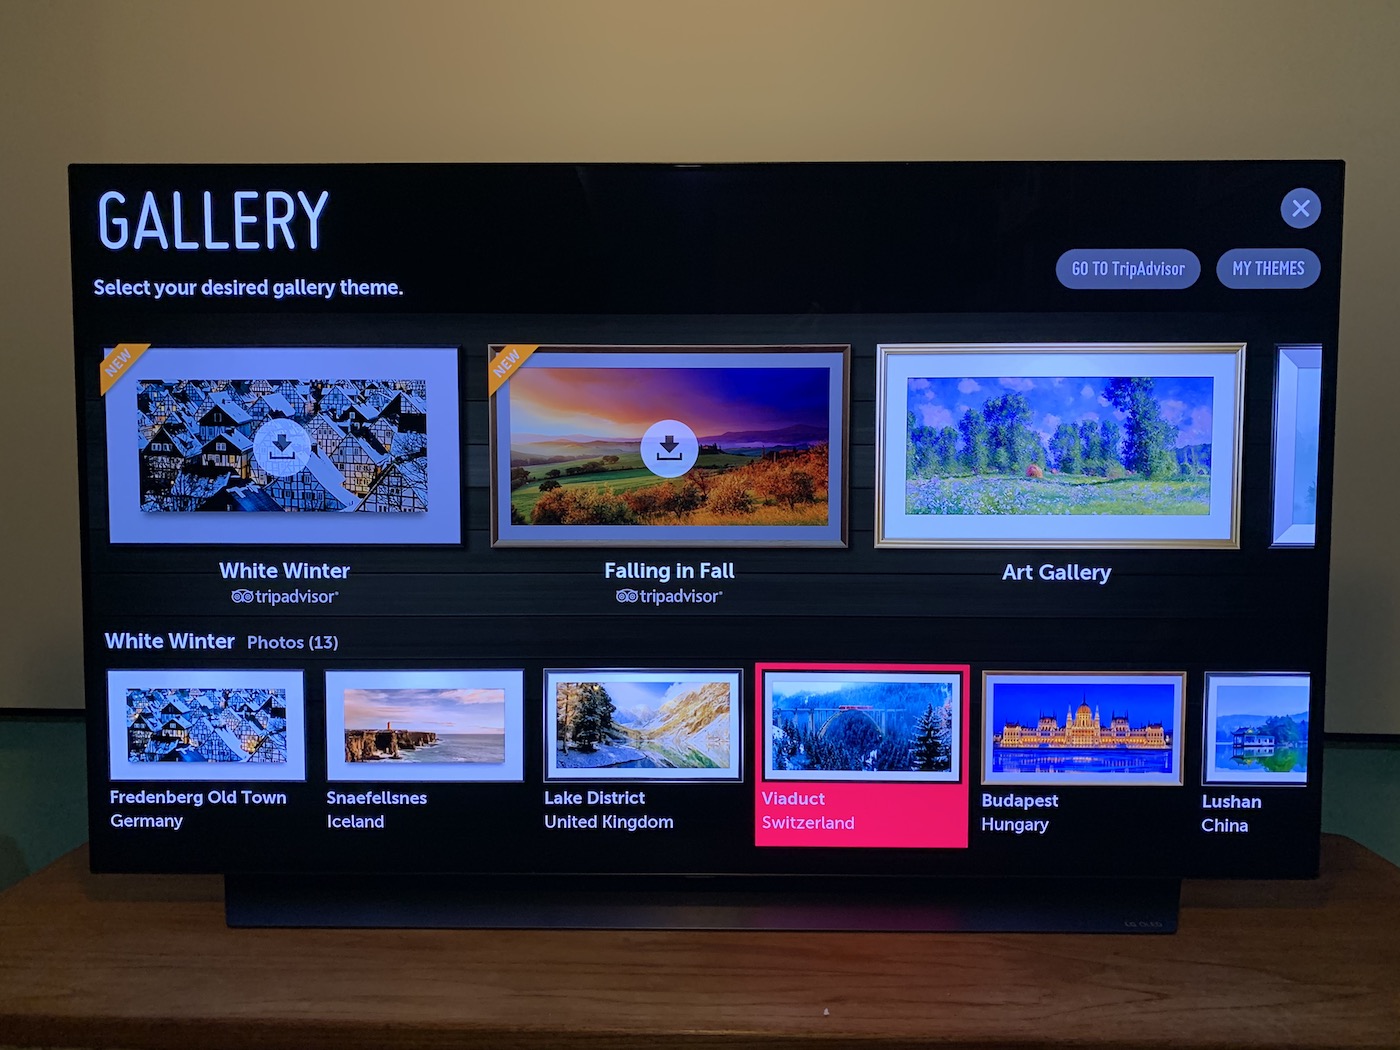 Gallery Mode of the LG C9 OLED 4K TV